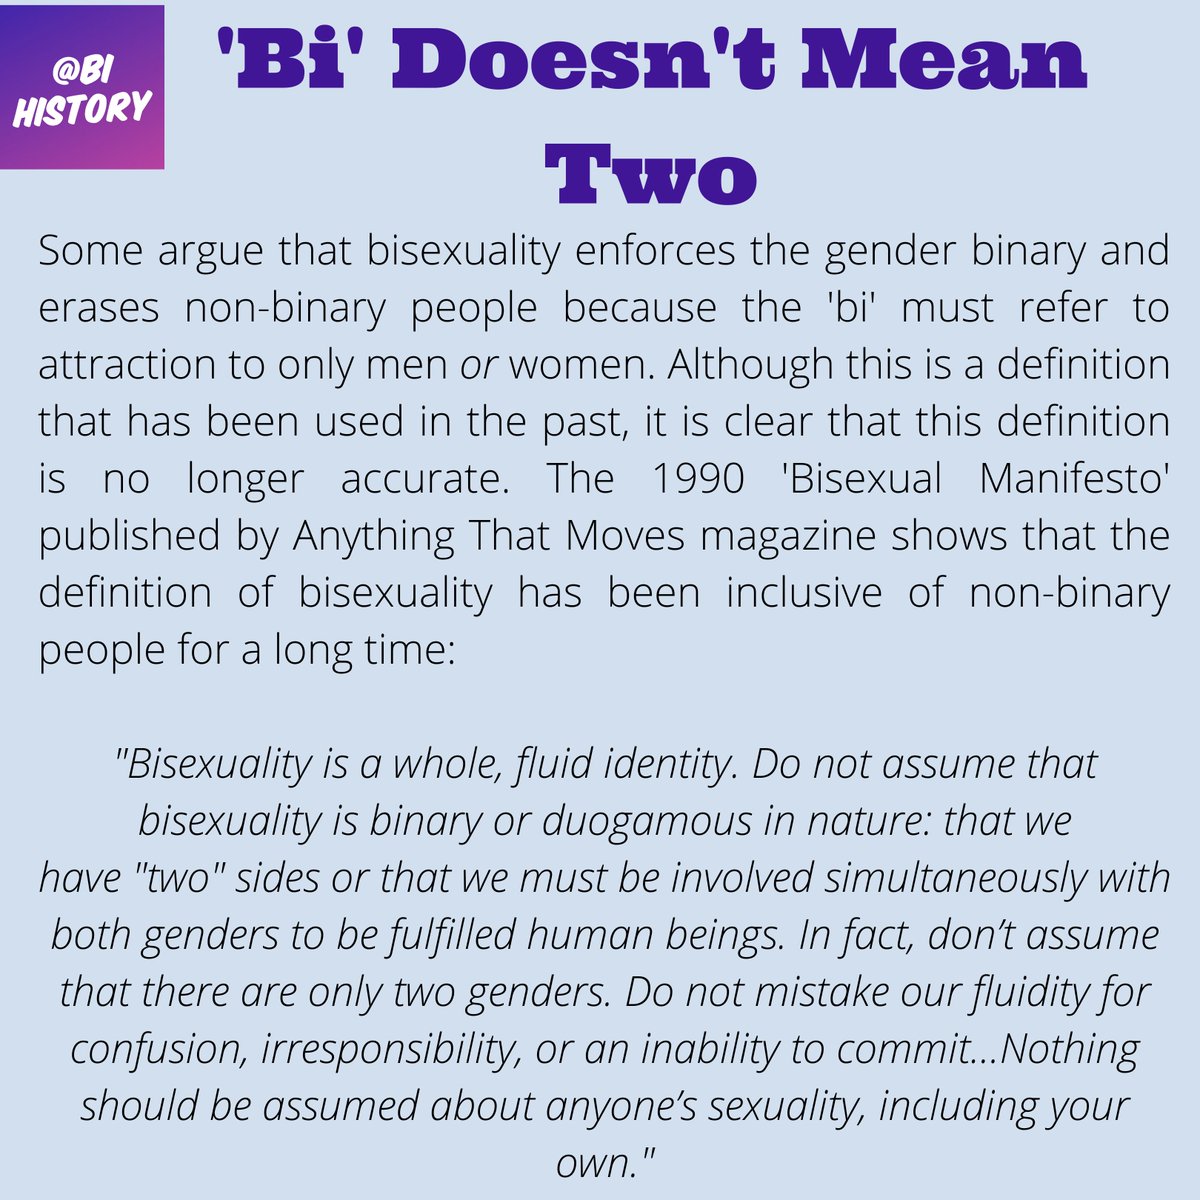 What does the word 'bisexual' mean, and what other identifiers may people use with similar meanings?